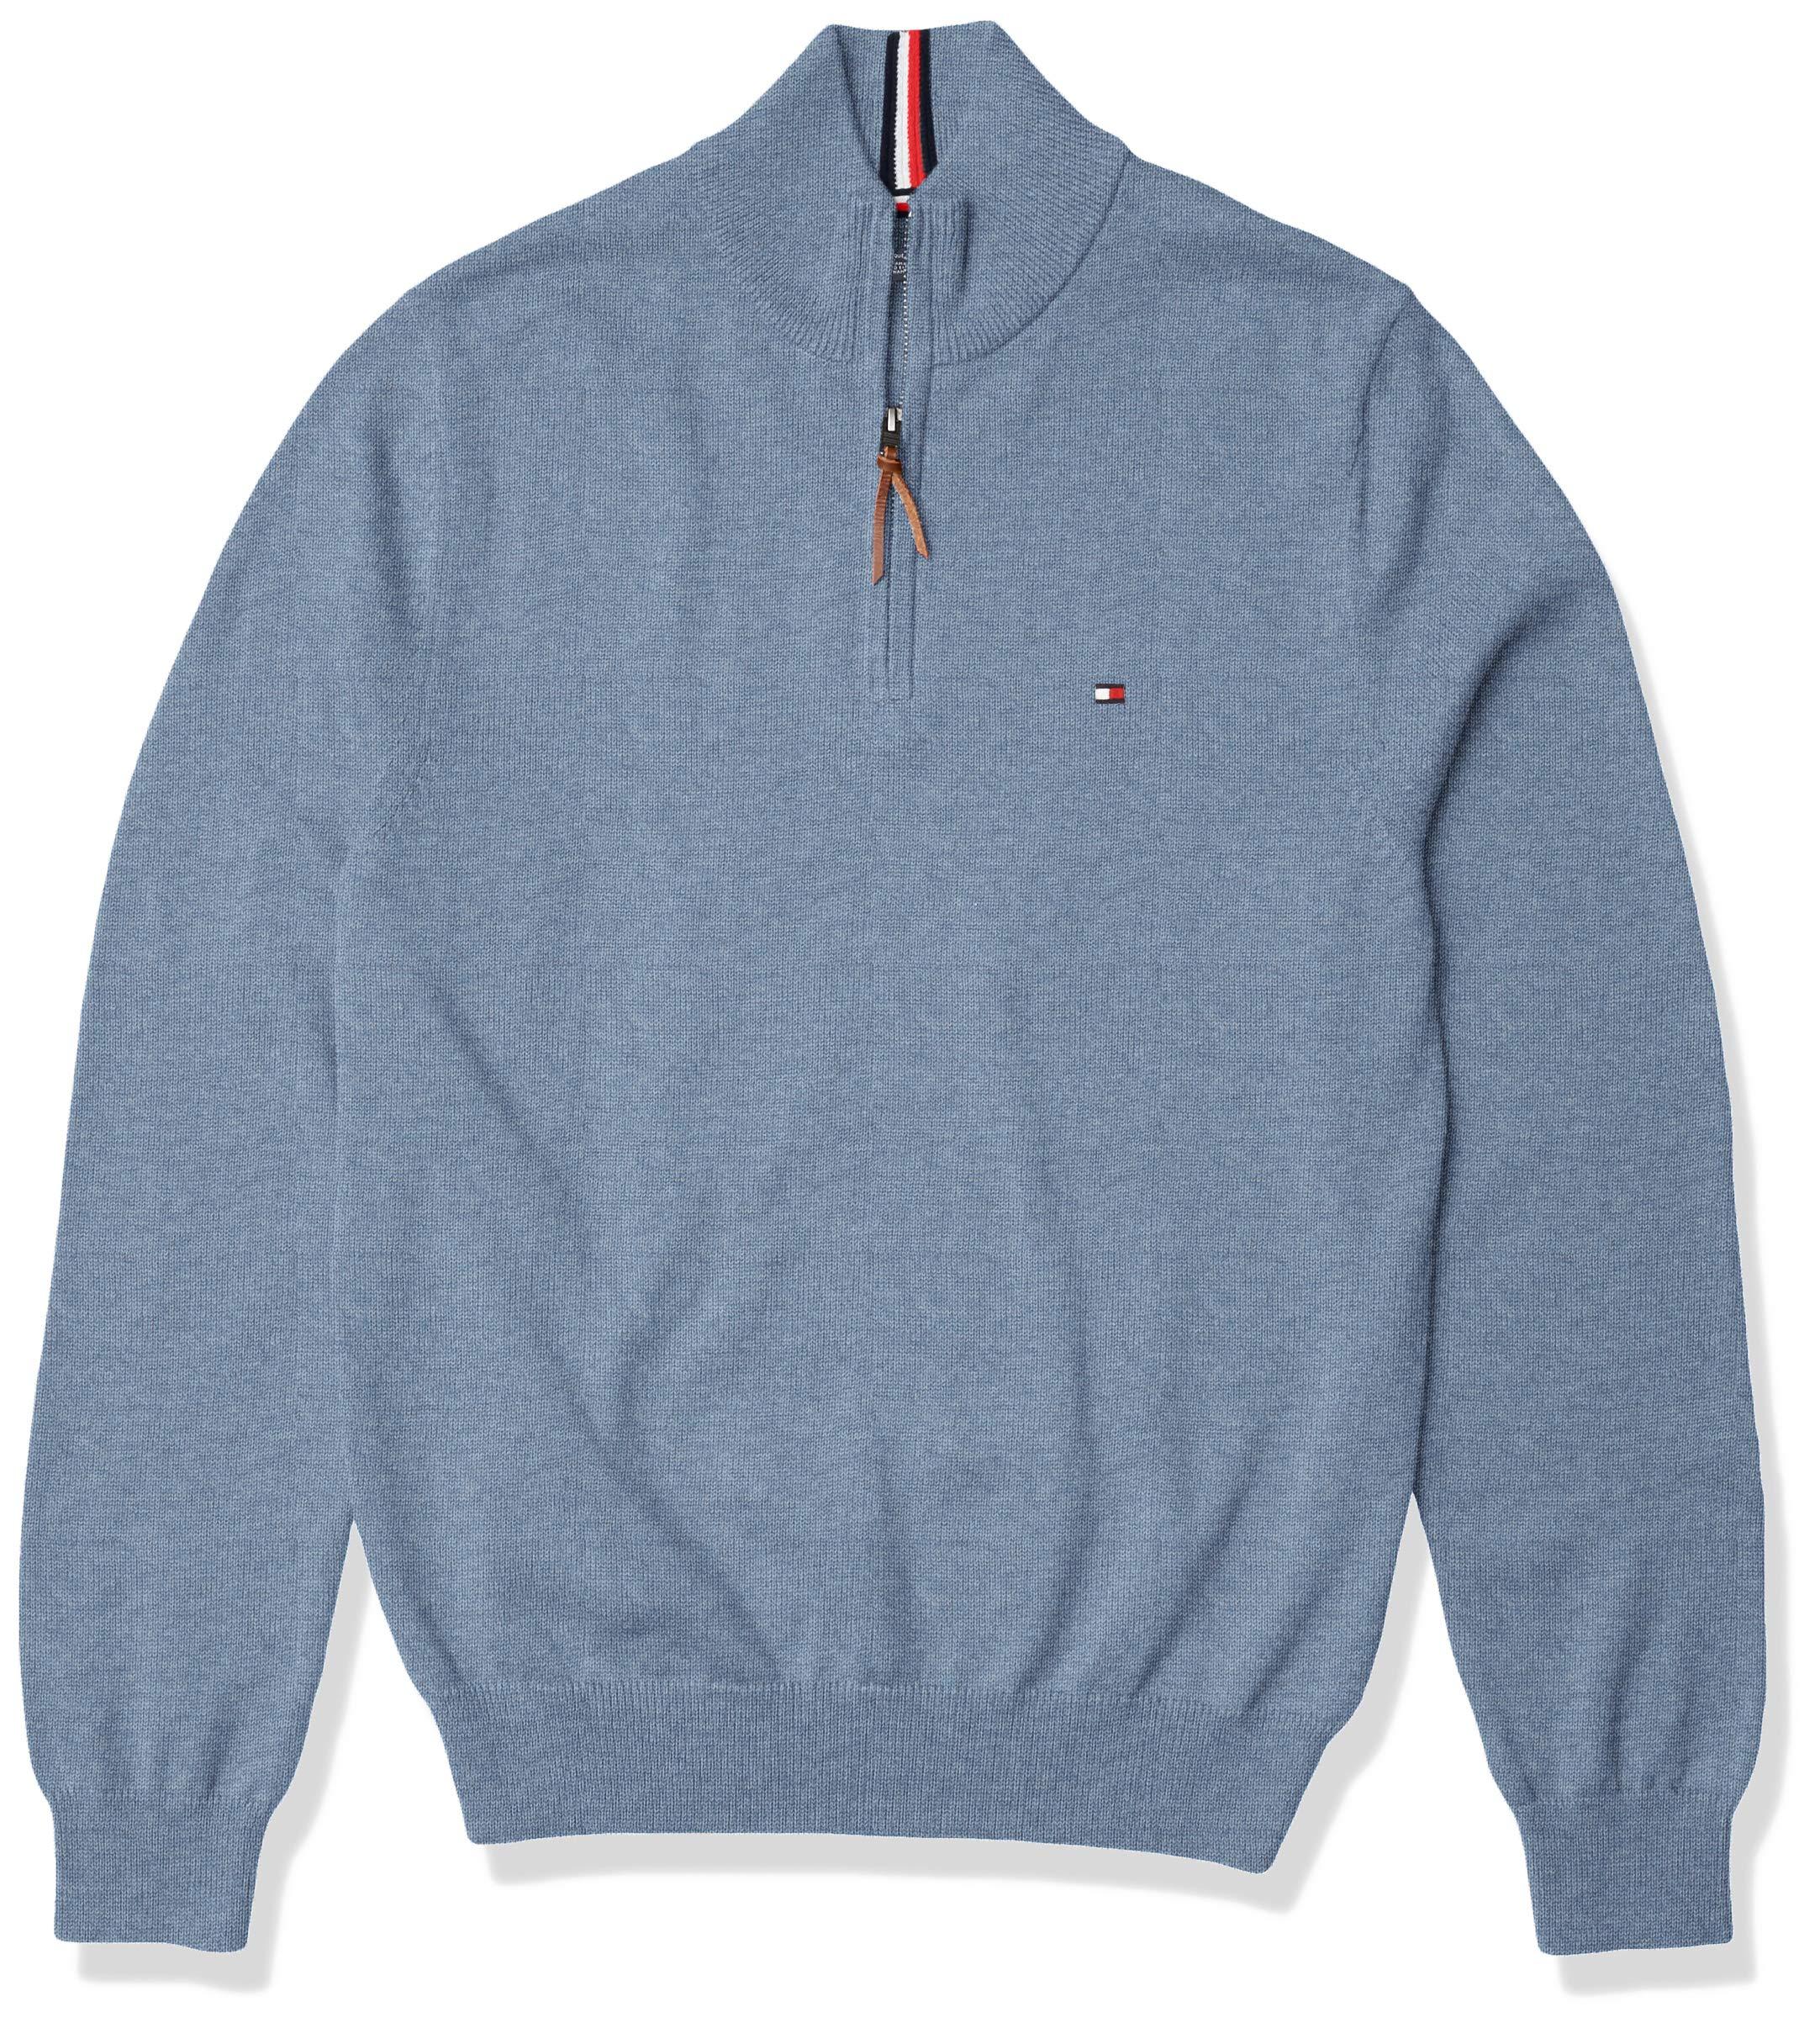 Tommy Hilfiger Cotton Quarter Zip Sweater in Blue for Men - Save 9% - Lyst